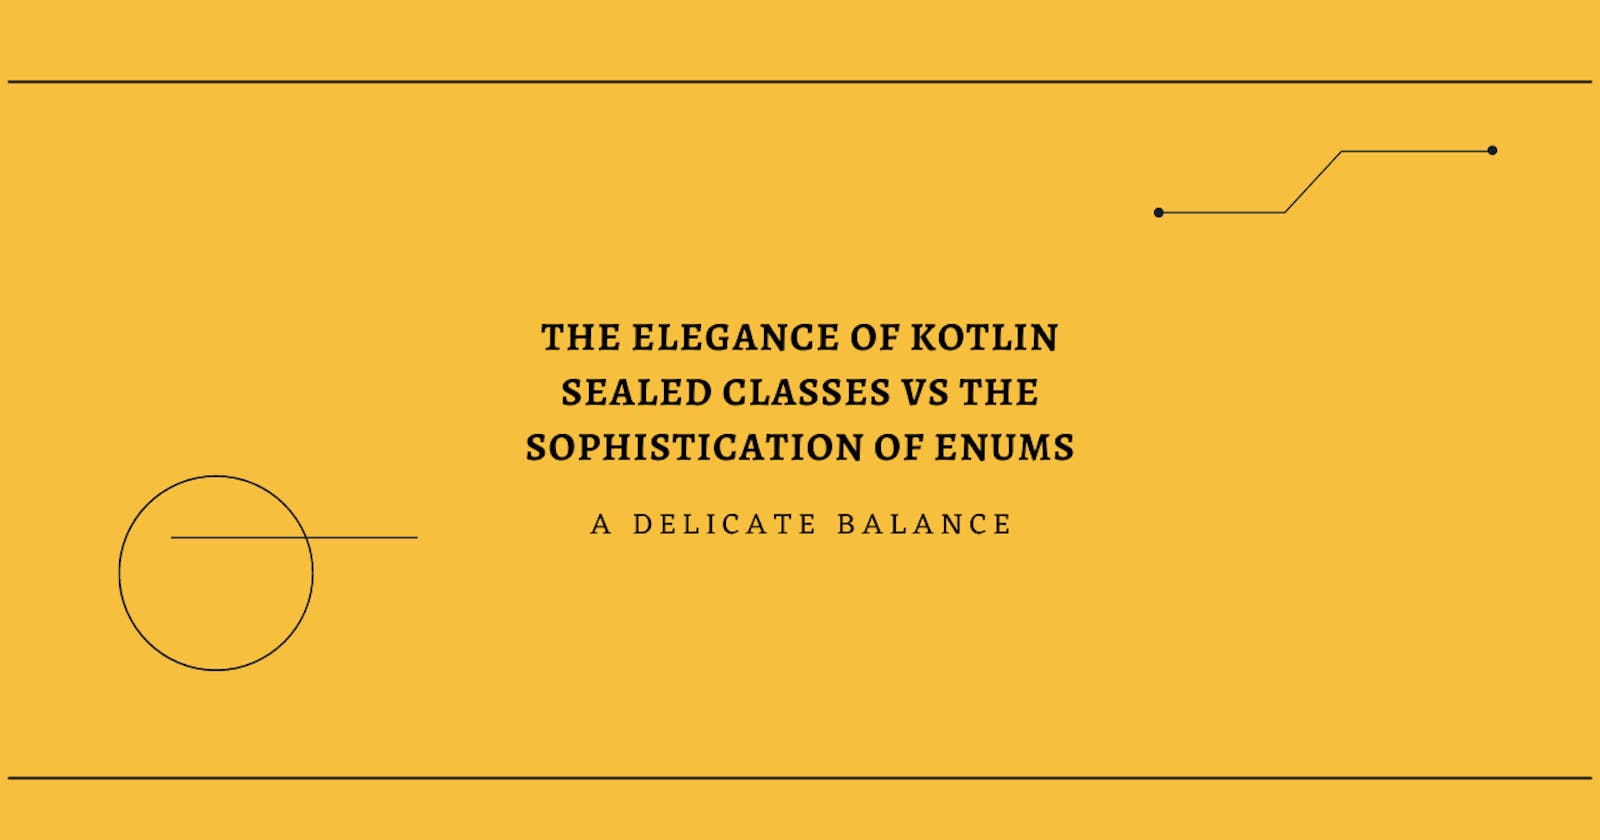 The Elegance of Kotlin Sealed Classes vs the Sophistication of Enums: A Delicate Balance